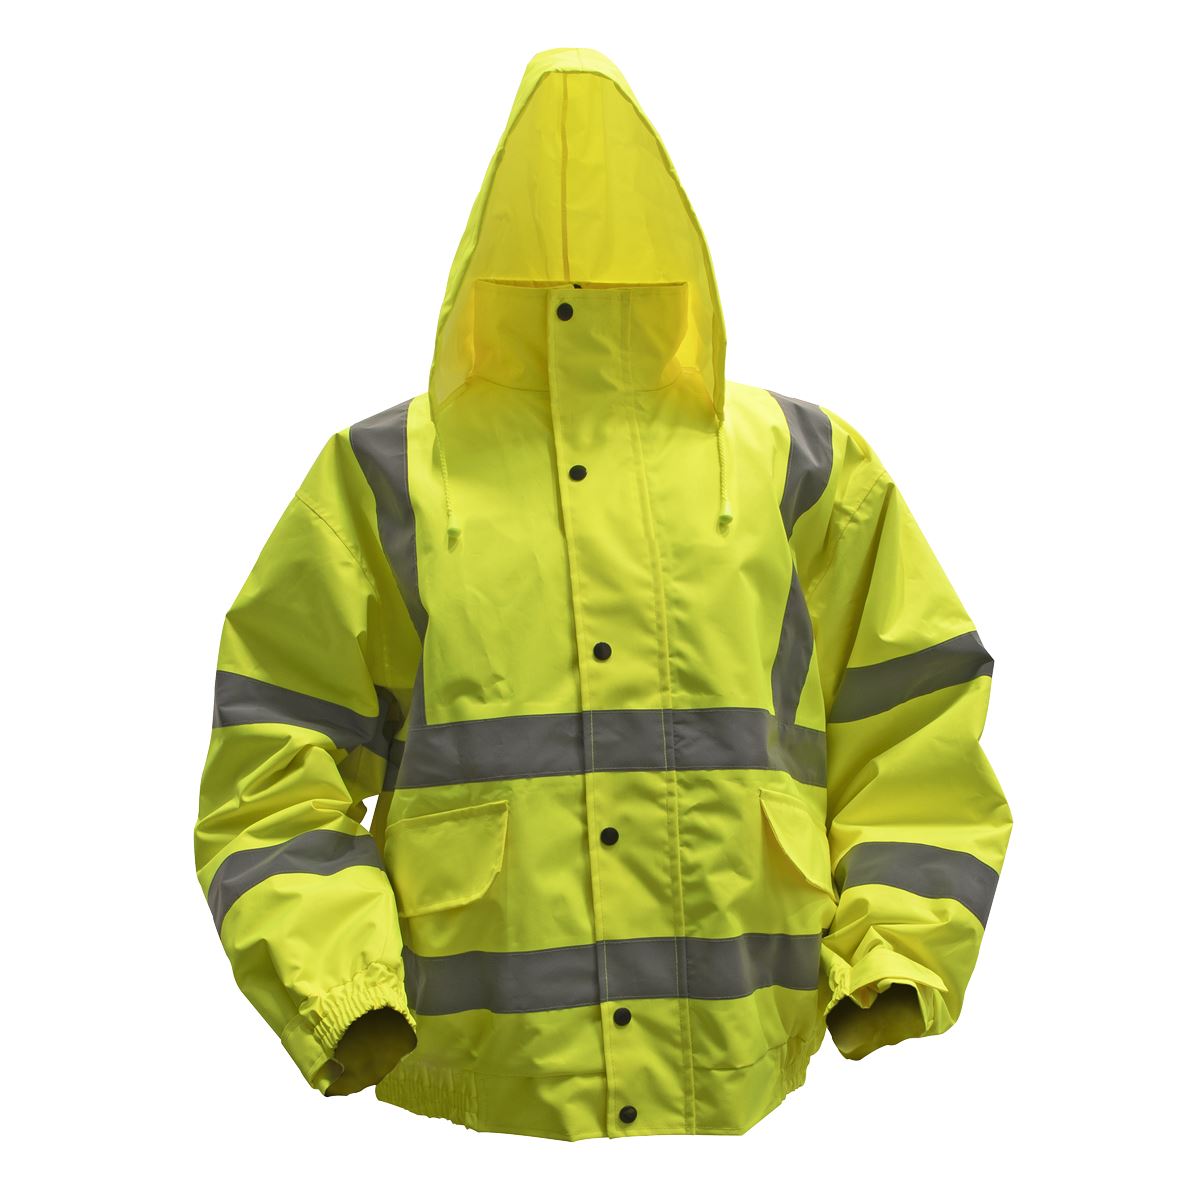 Worksafe by Sealey Hi-Vis Yellow Jacket with Quilted Lining & Elasticated Waist - XX-Large